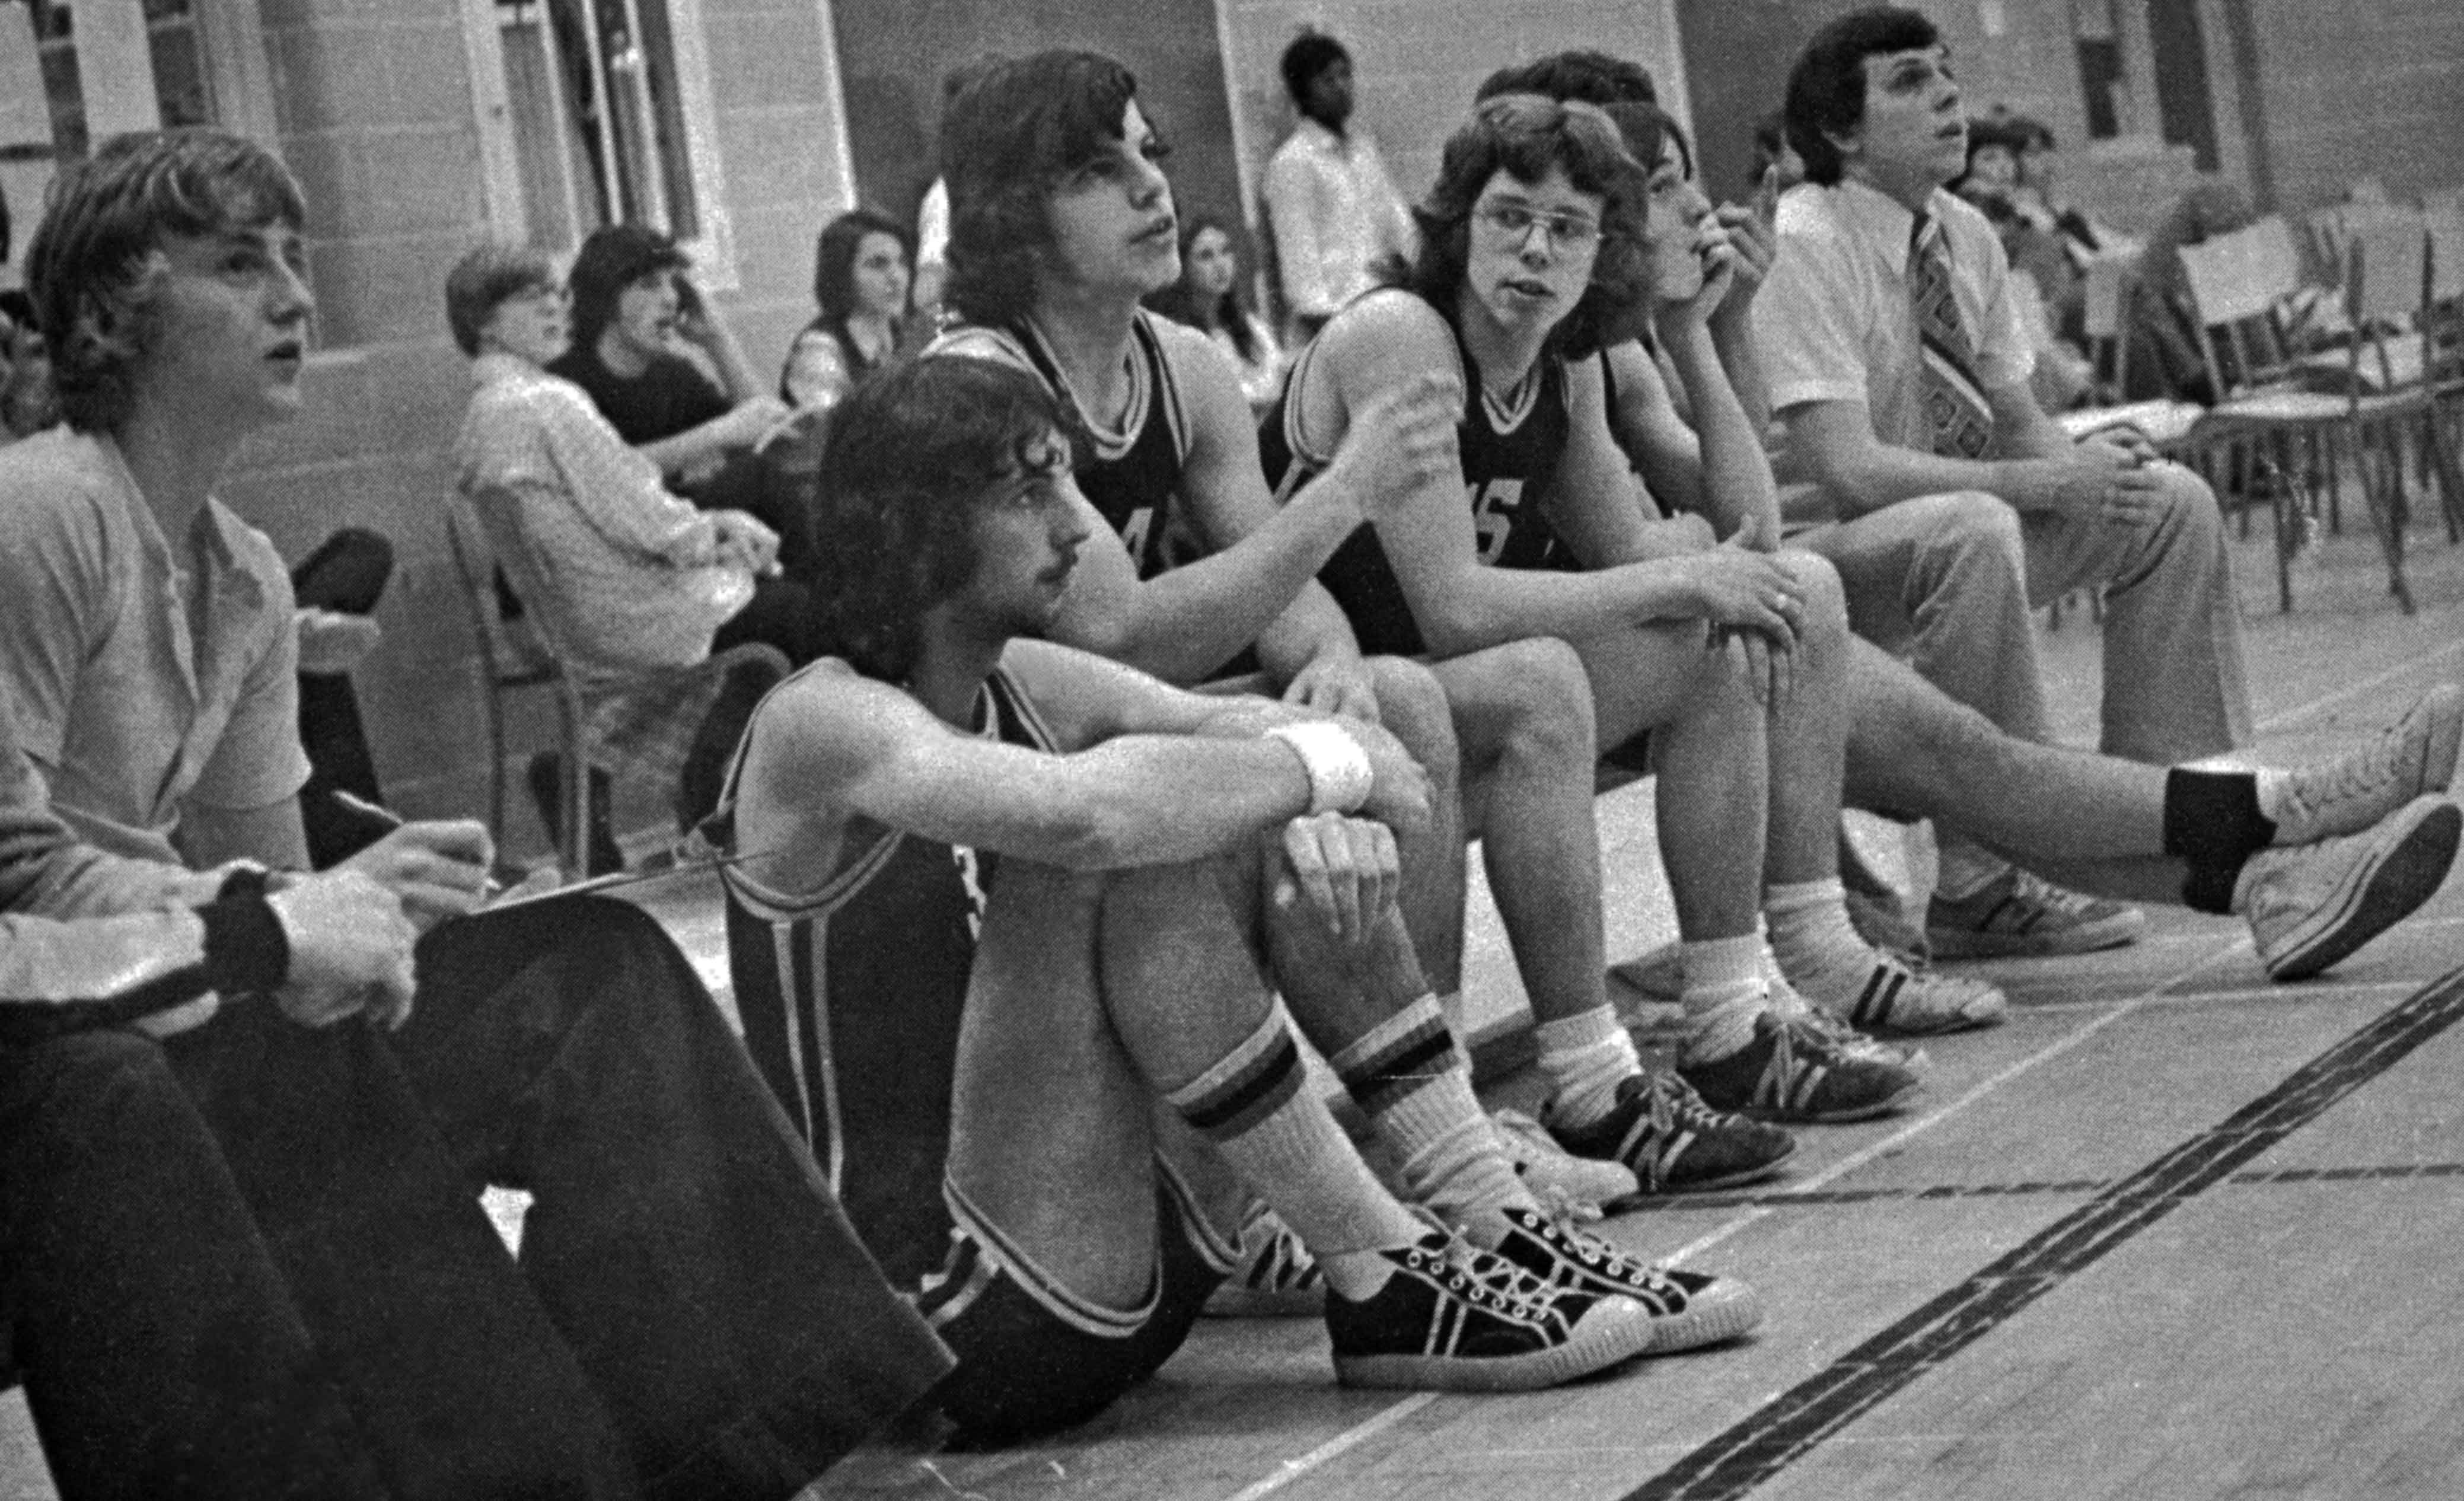 (Click to magnify) ... Sitting on floor: Peter Freskiw, Middle (pointing) Mark Griffin, turned to camera, John Elson; coach (far right) Brian Manorek; Student with pen in hand (probably keeping stats), unknown.